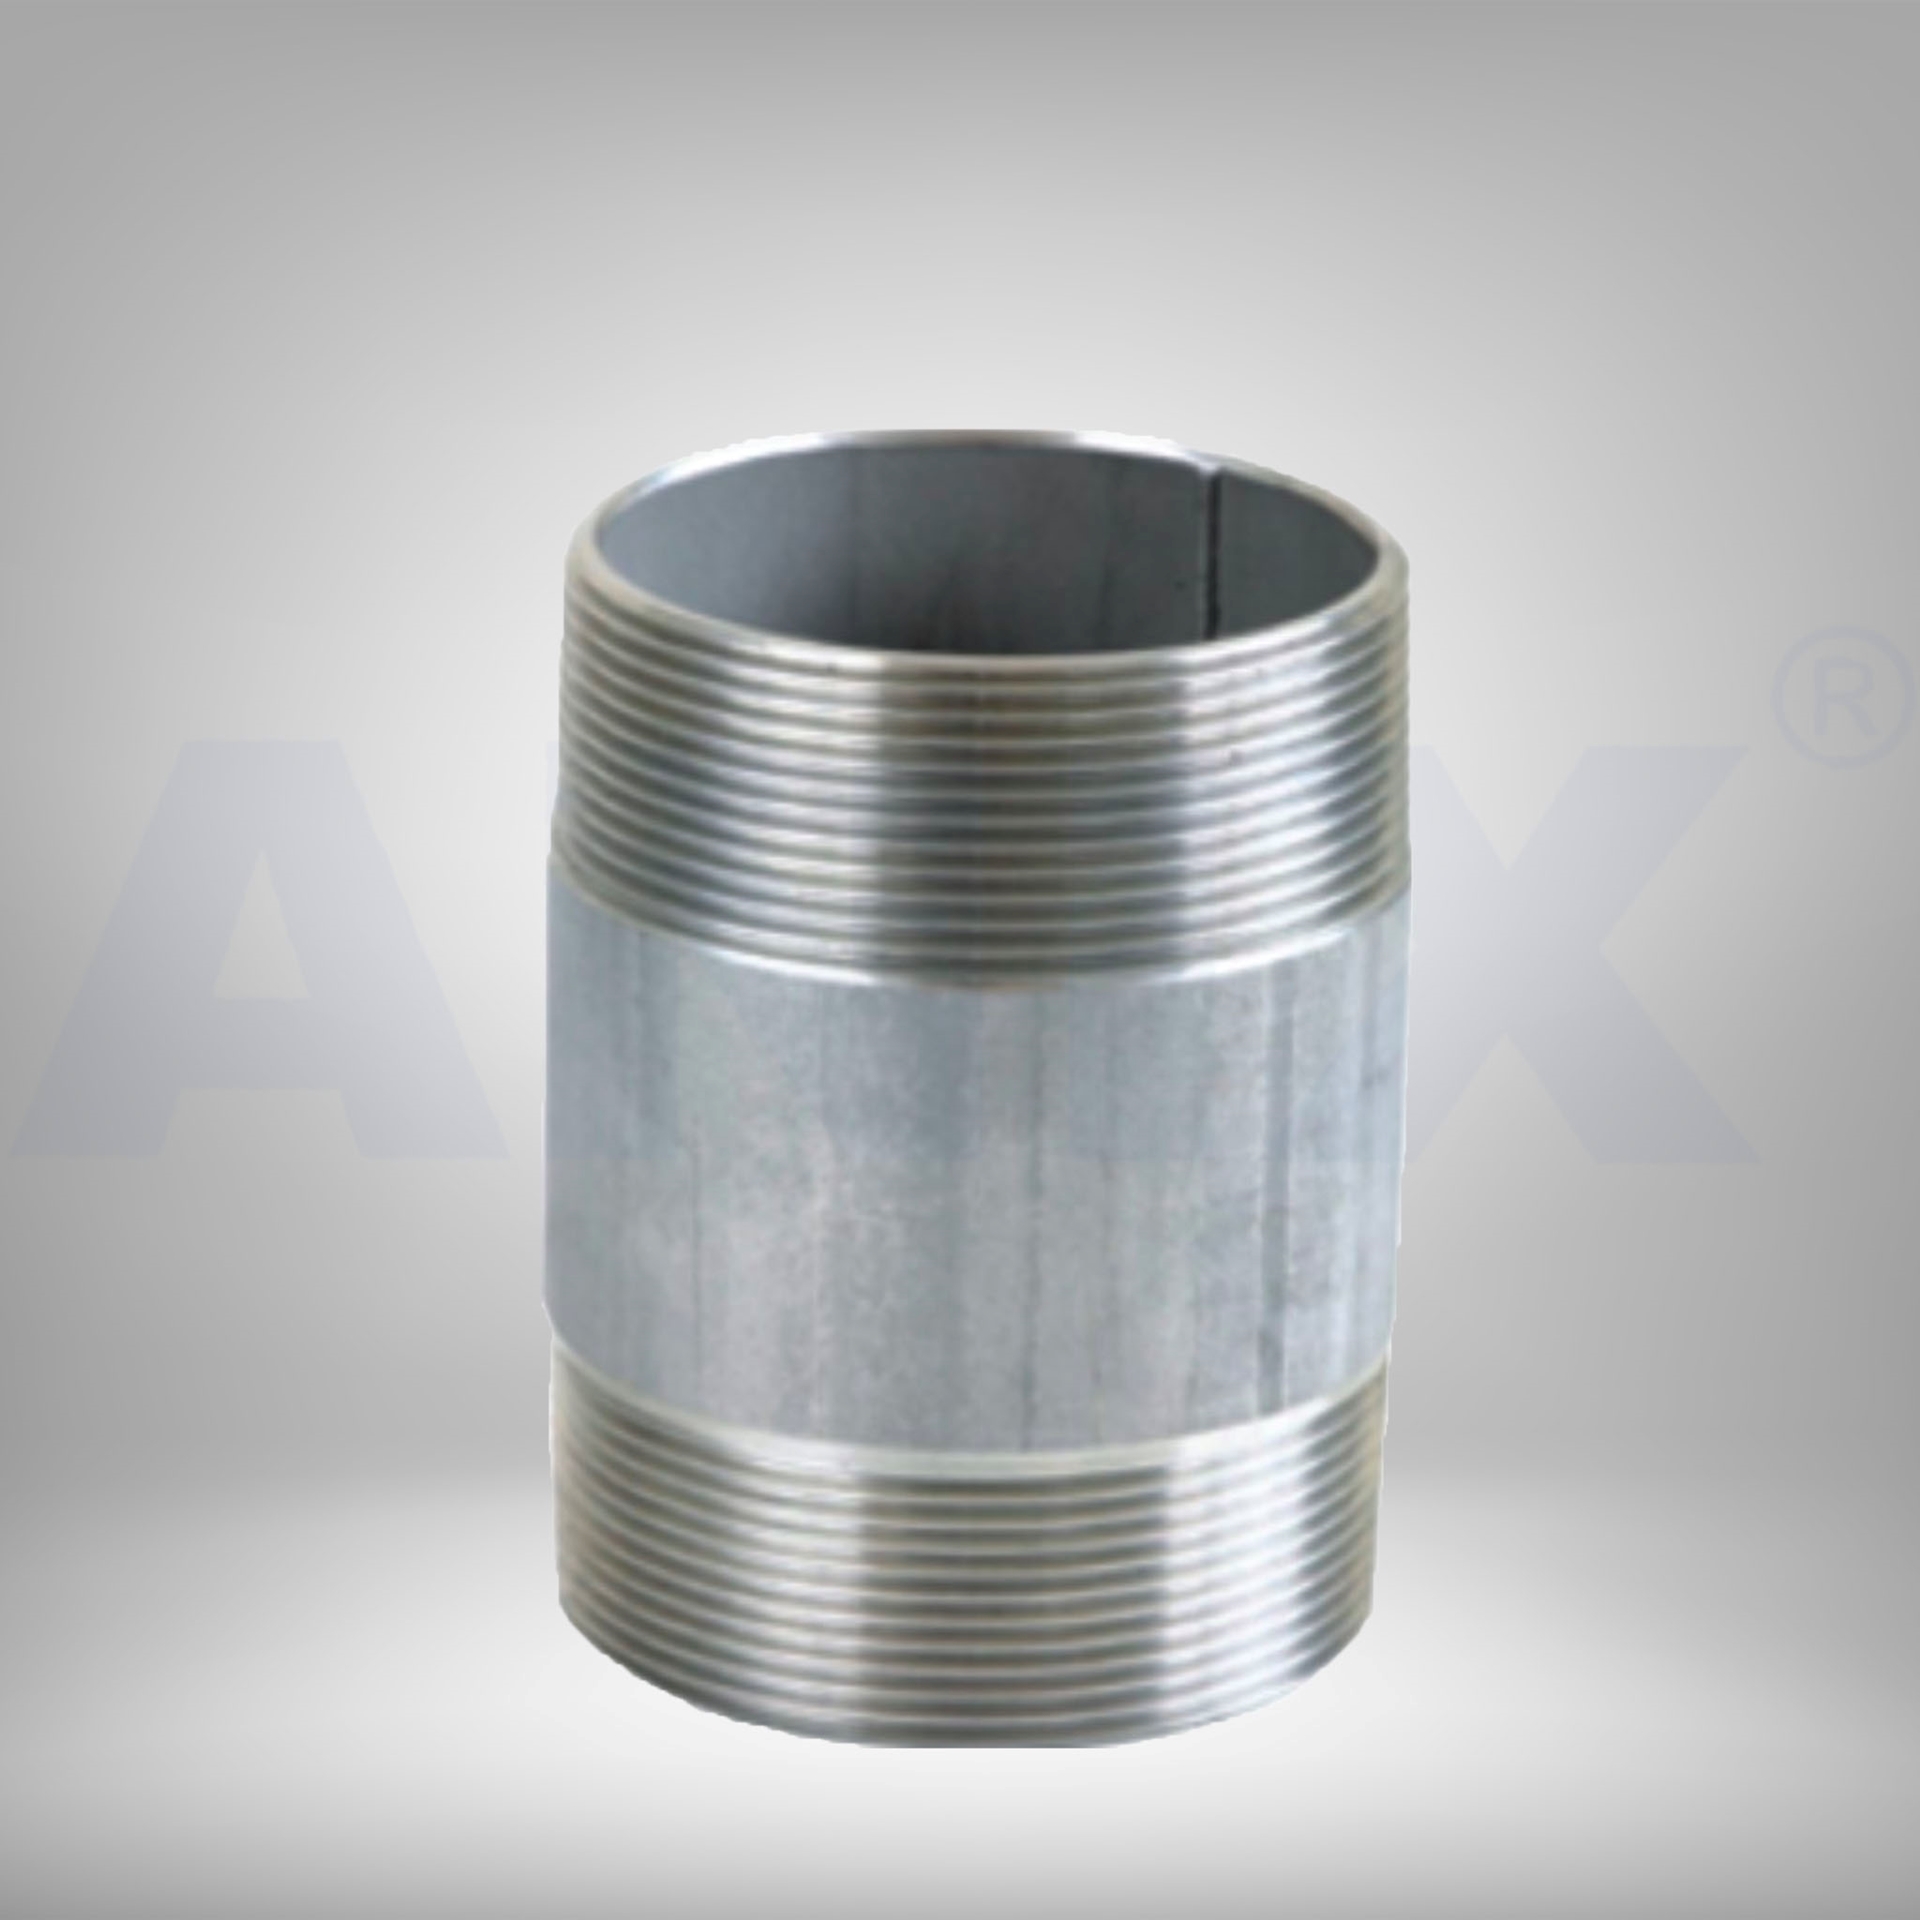 Picture of ANIX Stainless Steel CL150 NPT Barrell Nipple